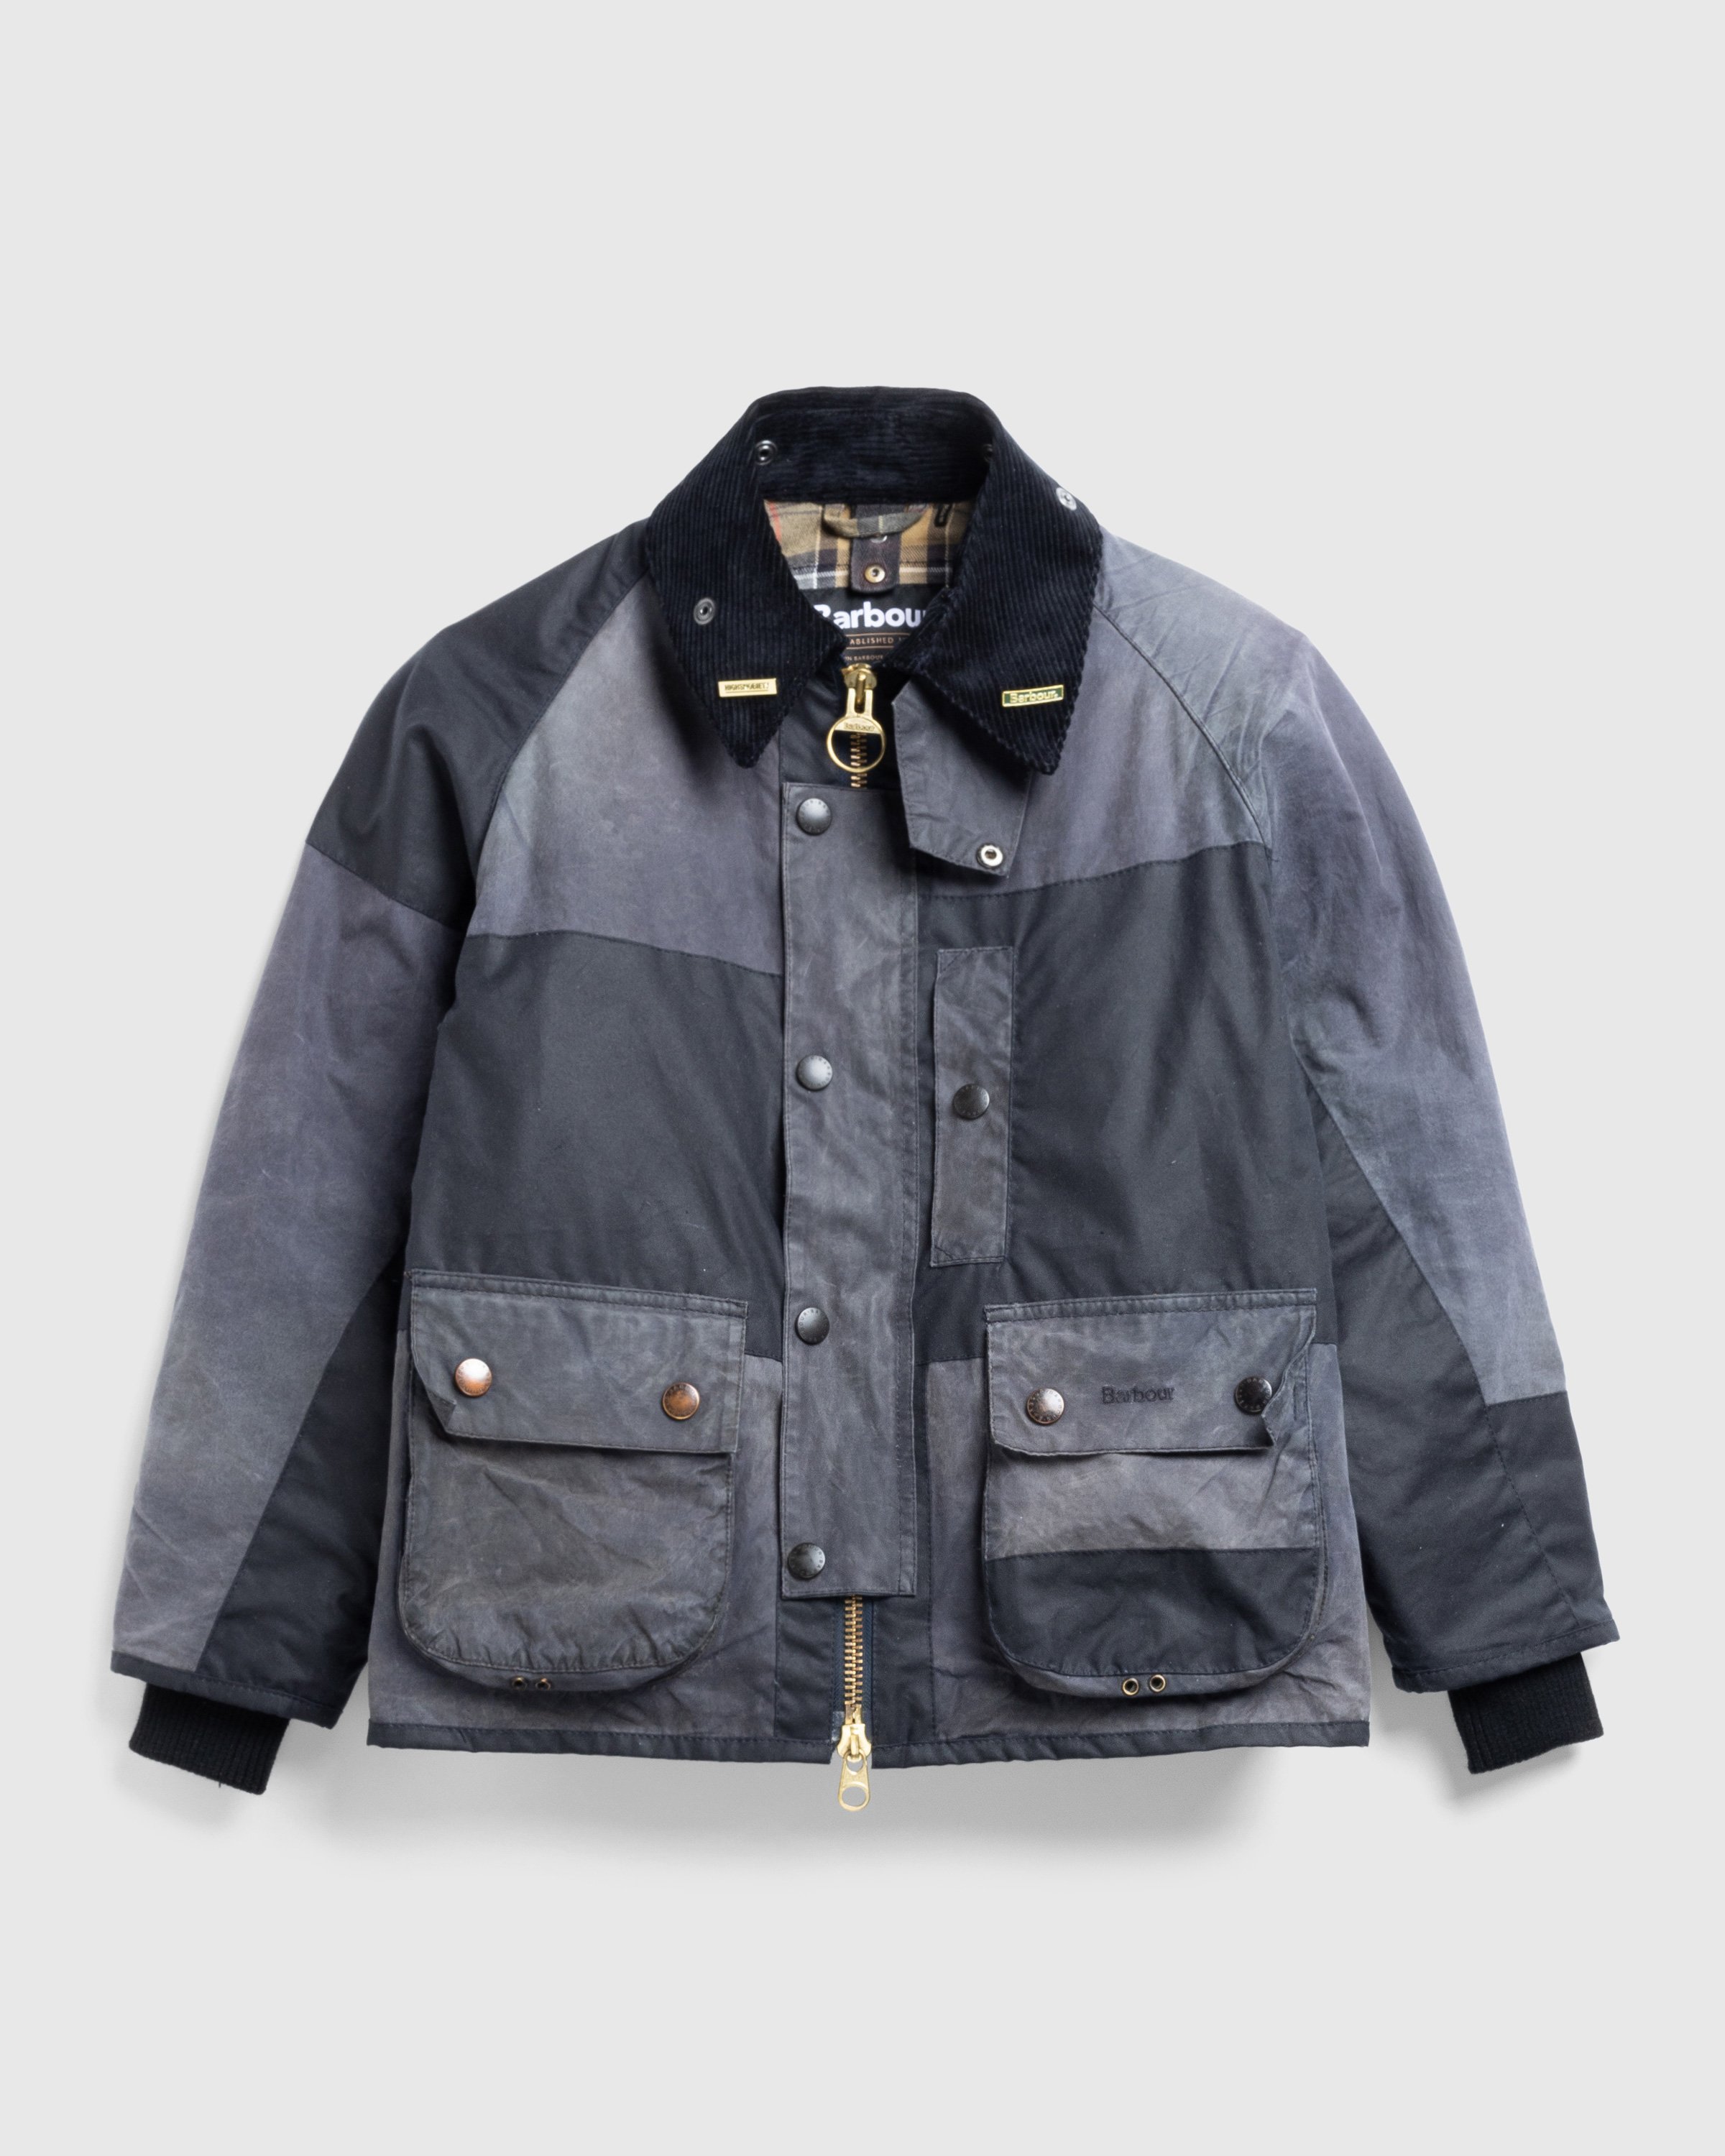 Barbour x Highsnobiety - Re-Loved Cropped Bedale Jacket 1 - 36 - Grey-Black - Clothing - Olive - Image 1